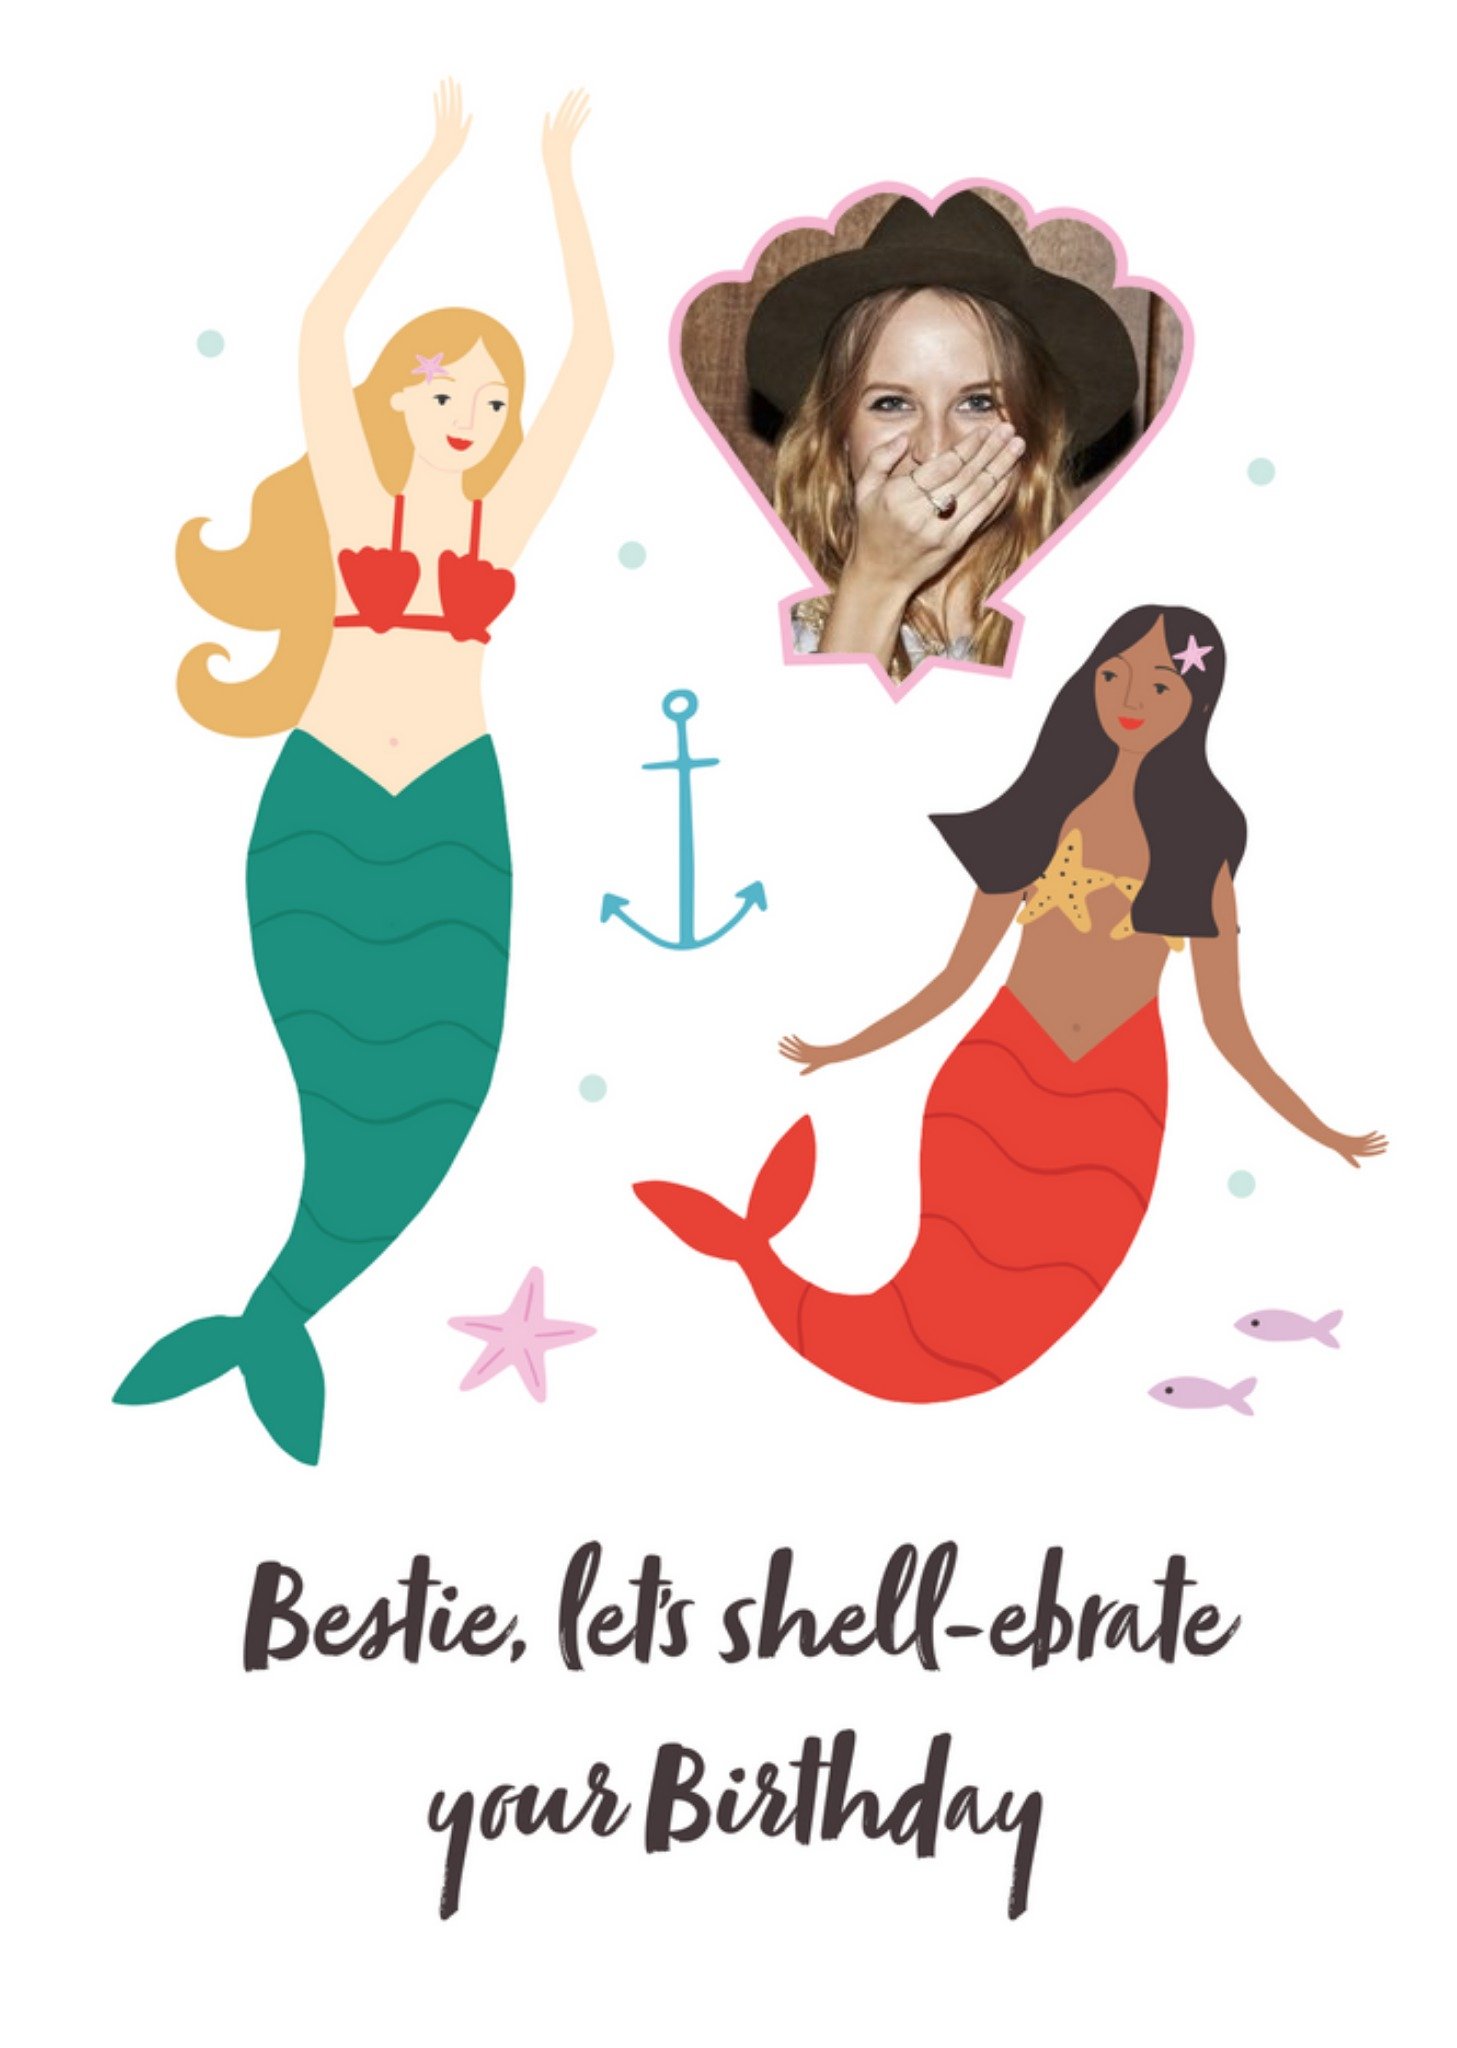 Moonpig Illustrated Cute Mermaids Bestie Lets Shell-Ebrate Your Birthday Card Ecard